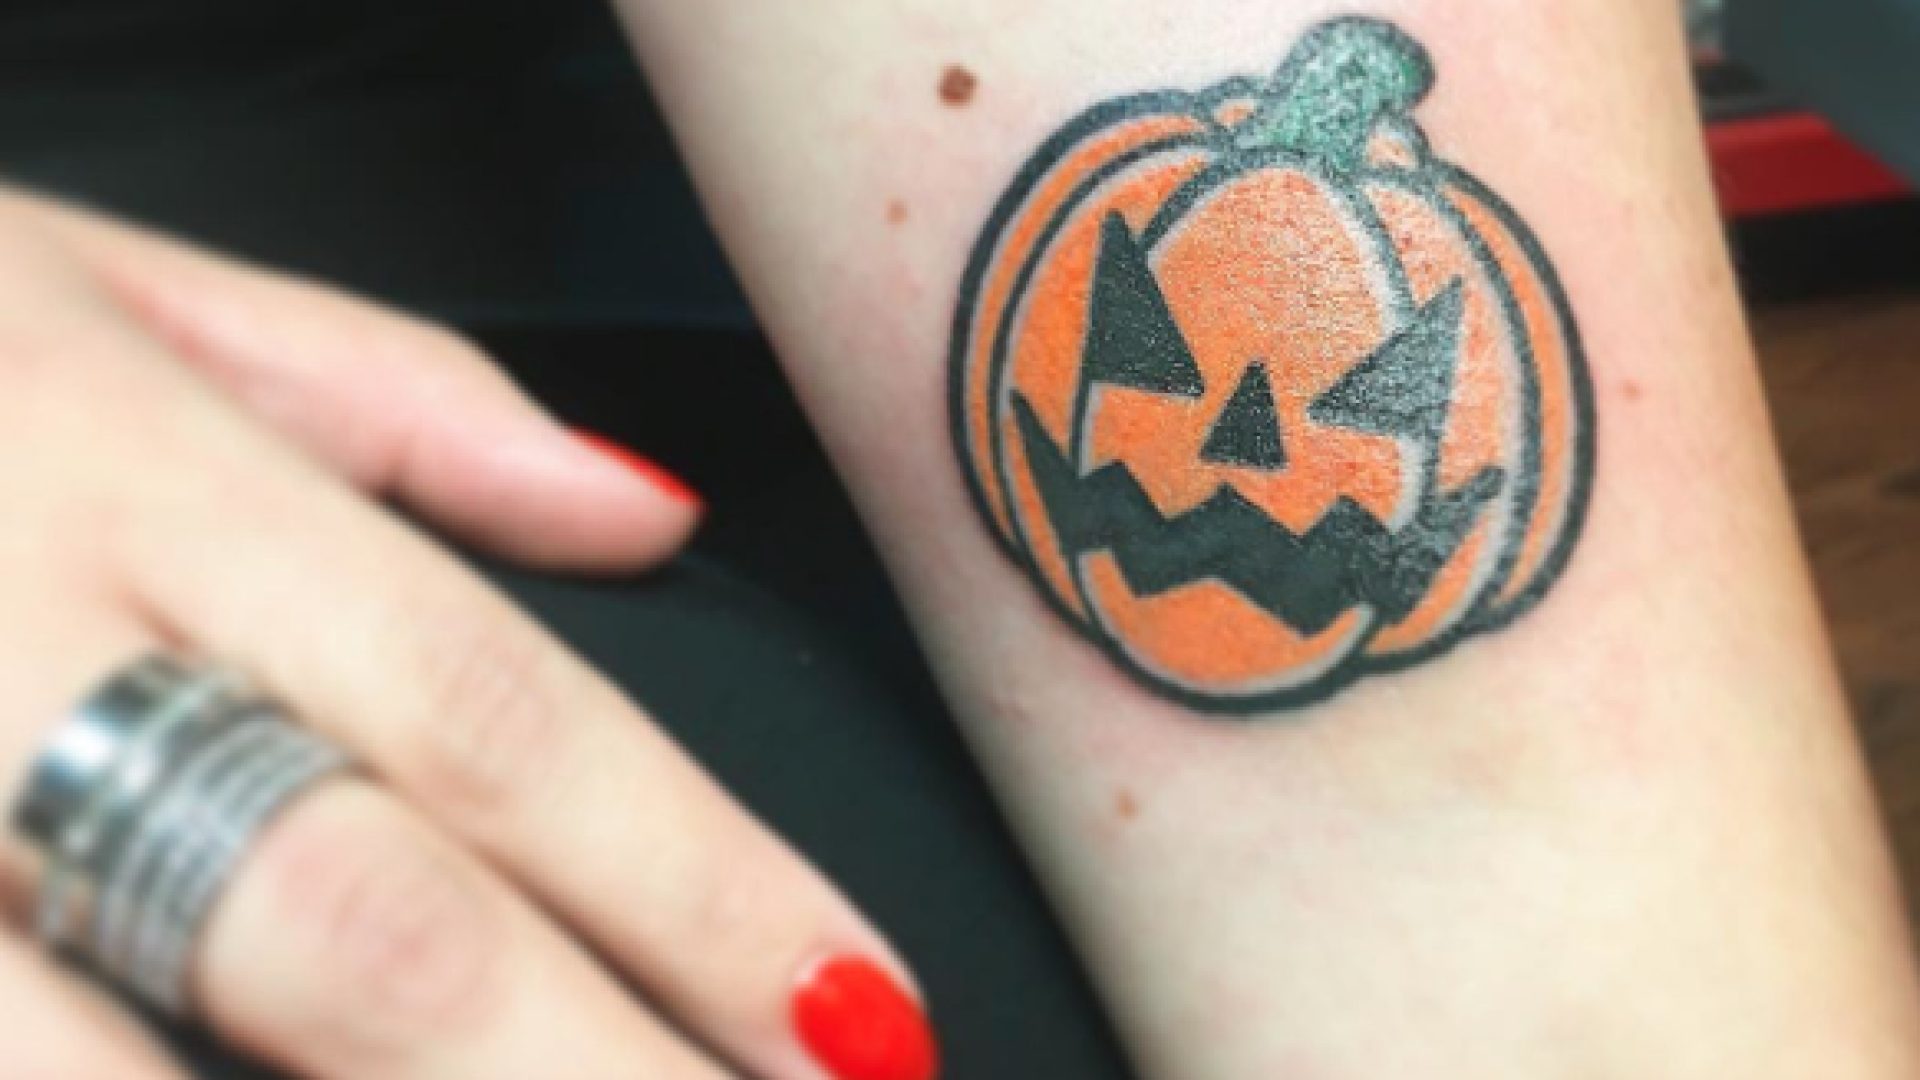 11 Pumpkin Tattoos To Show Your Undying Love For All Things Halloween